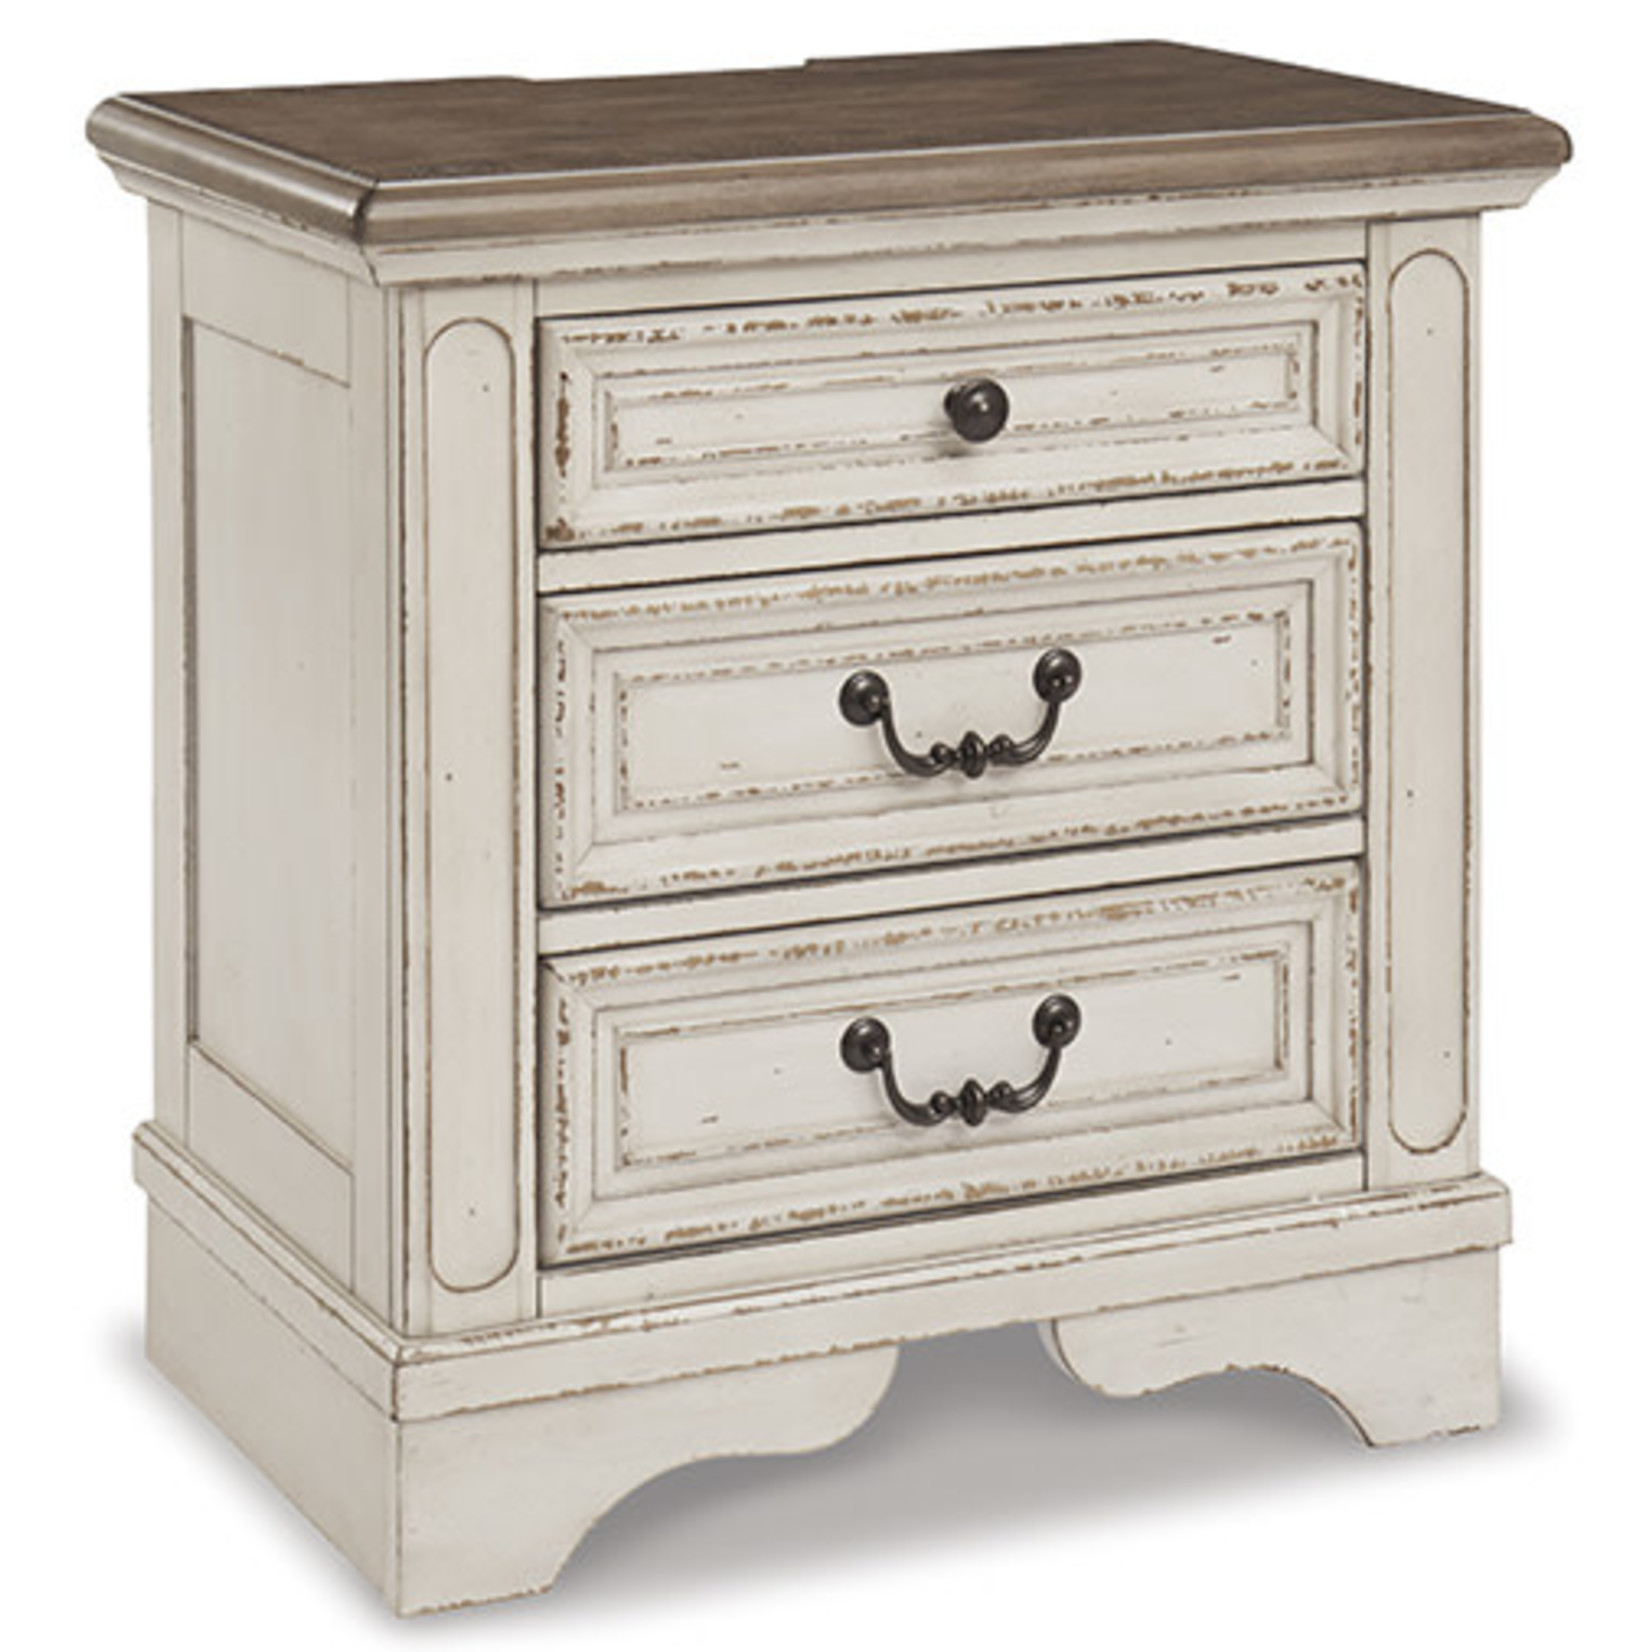 ASHLEY FURNITURE REALYN THREE DRAWER ANTIQUE WHITE NIGHT STAND BY ASHLEY